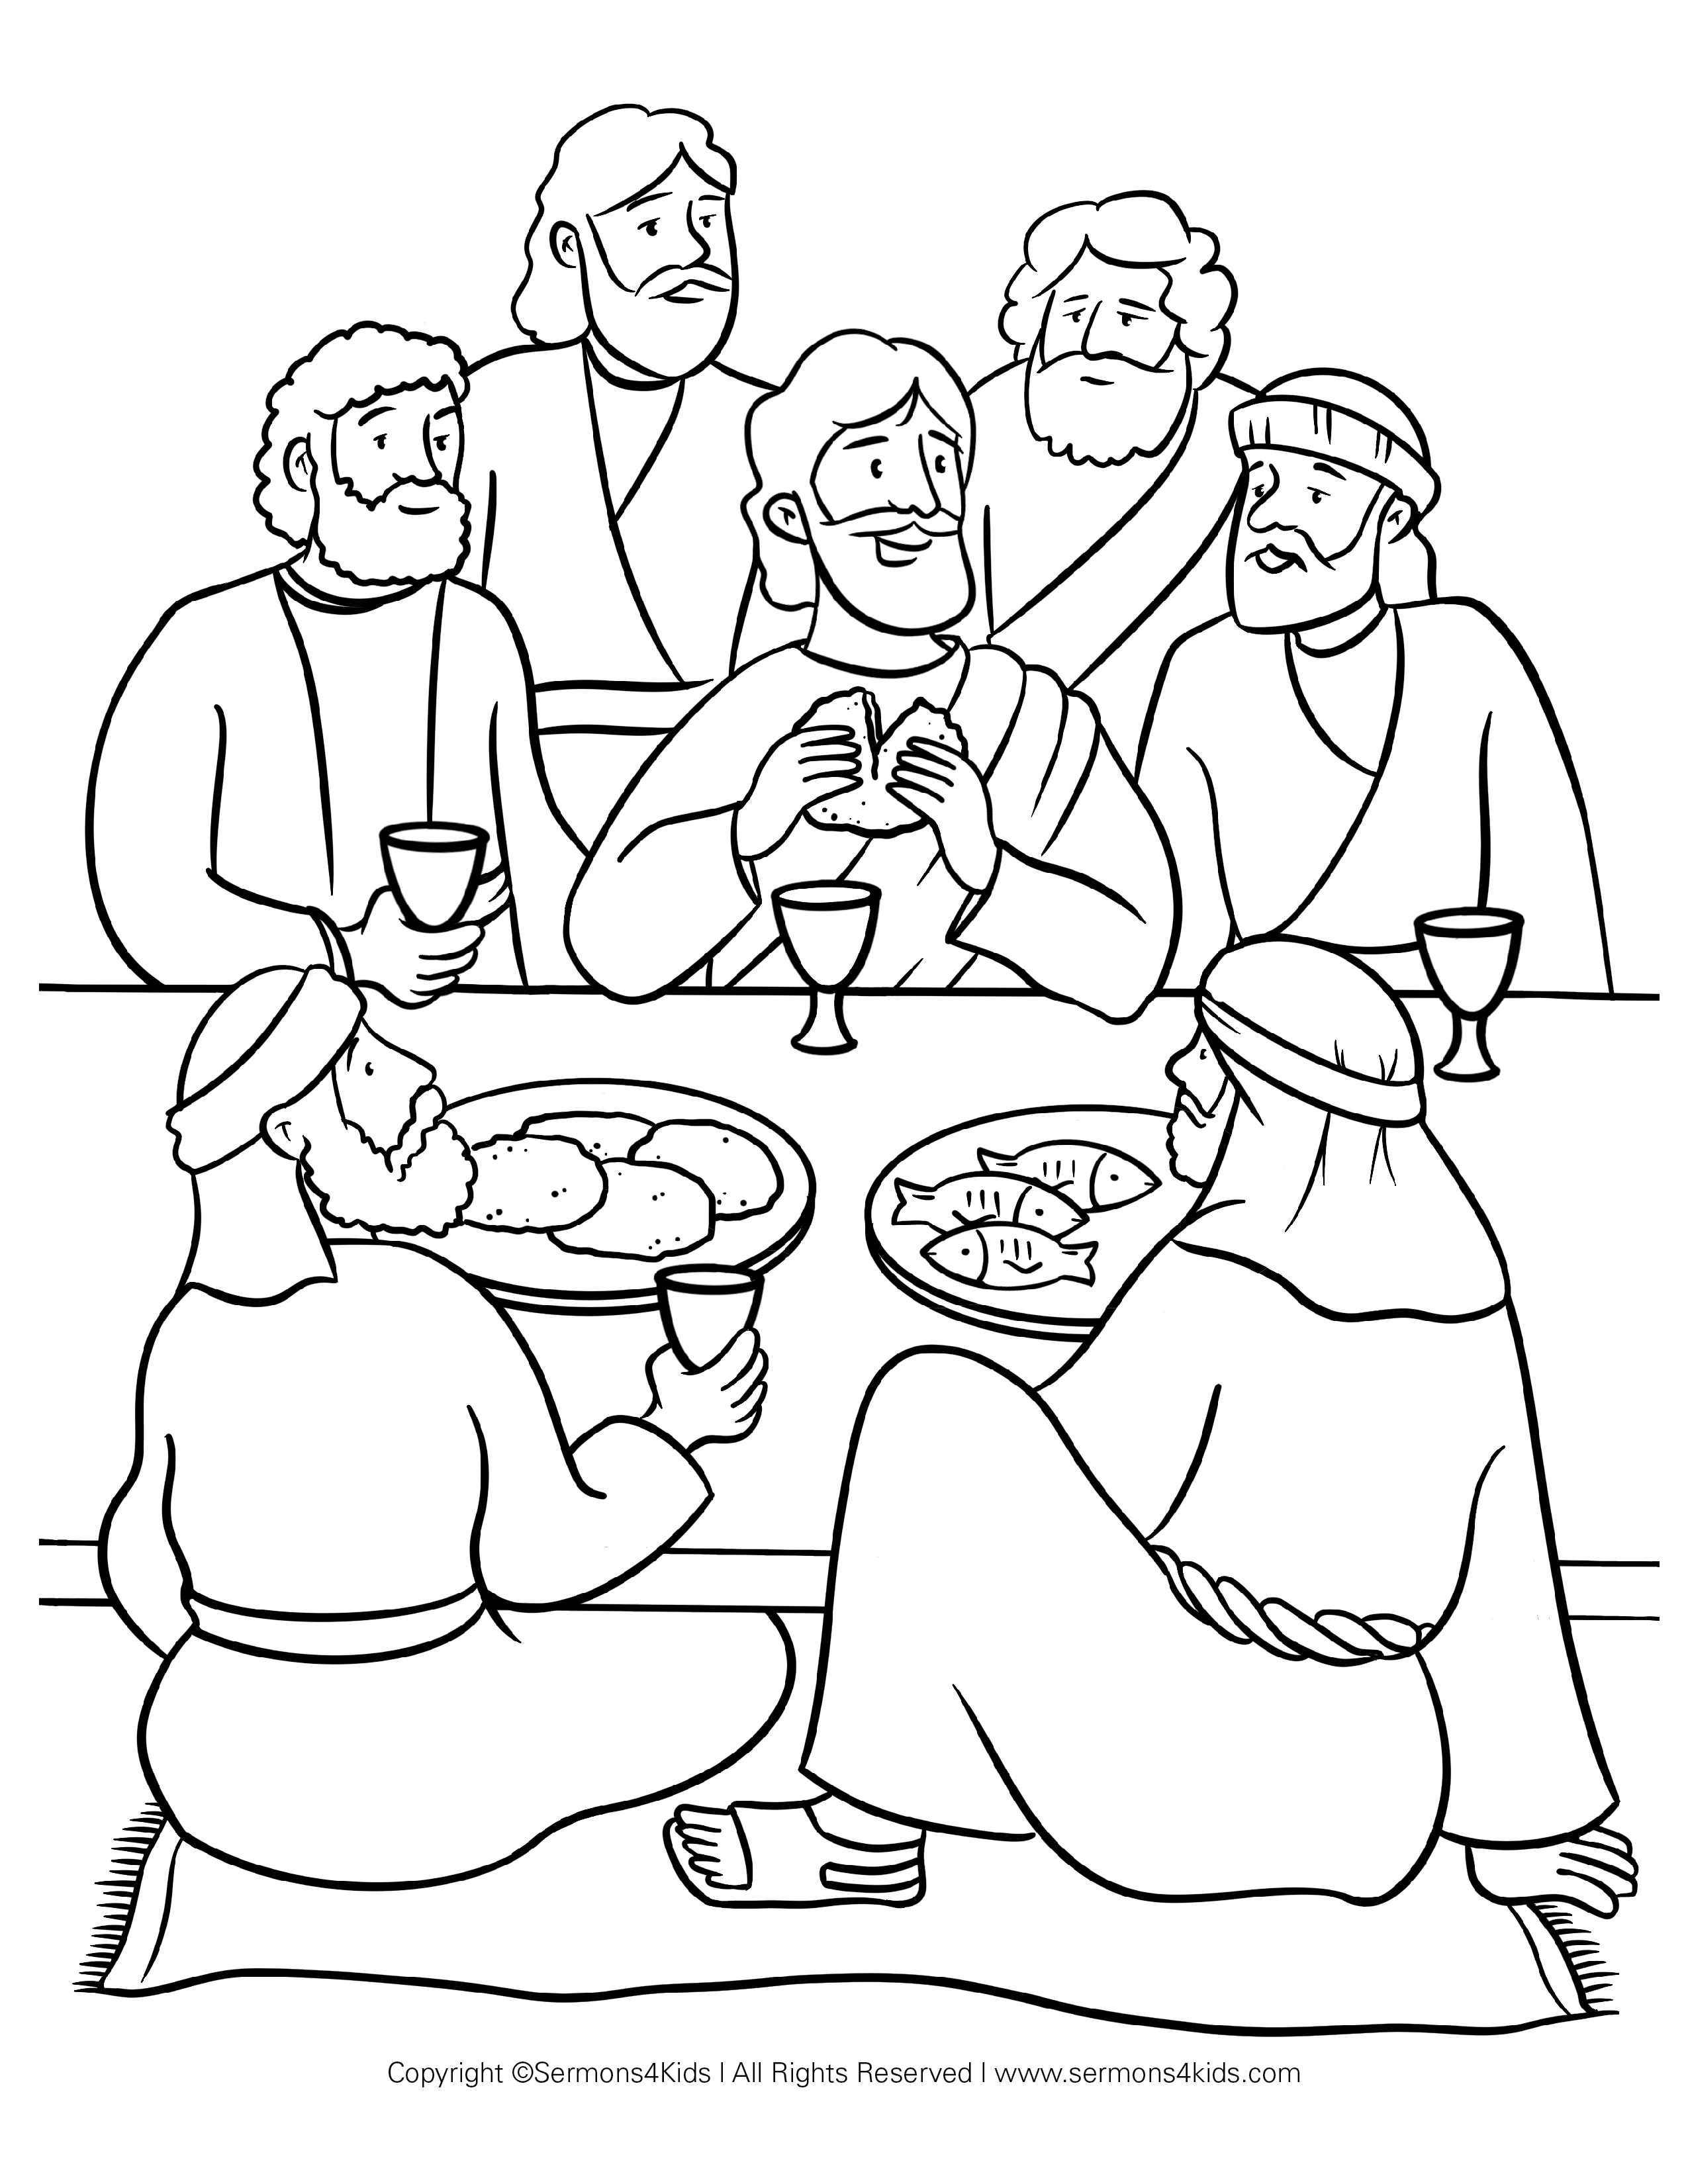 The Last Supper Coloring Page | Sermons4Kids